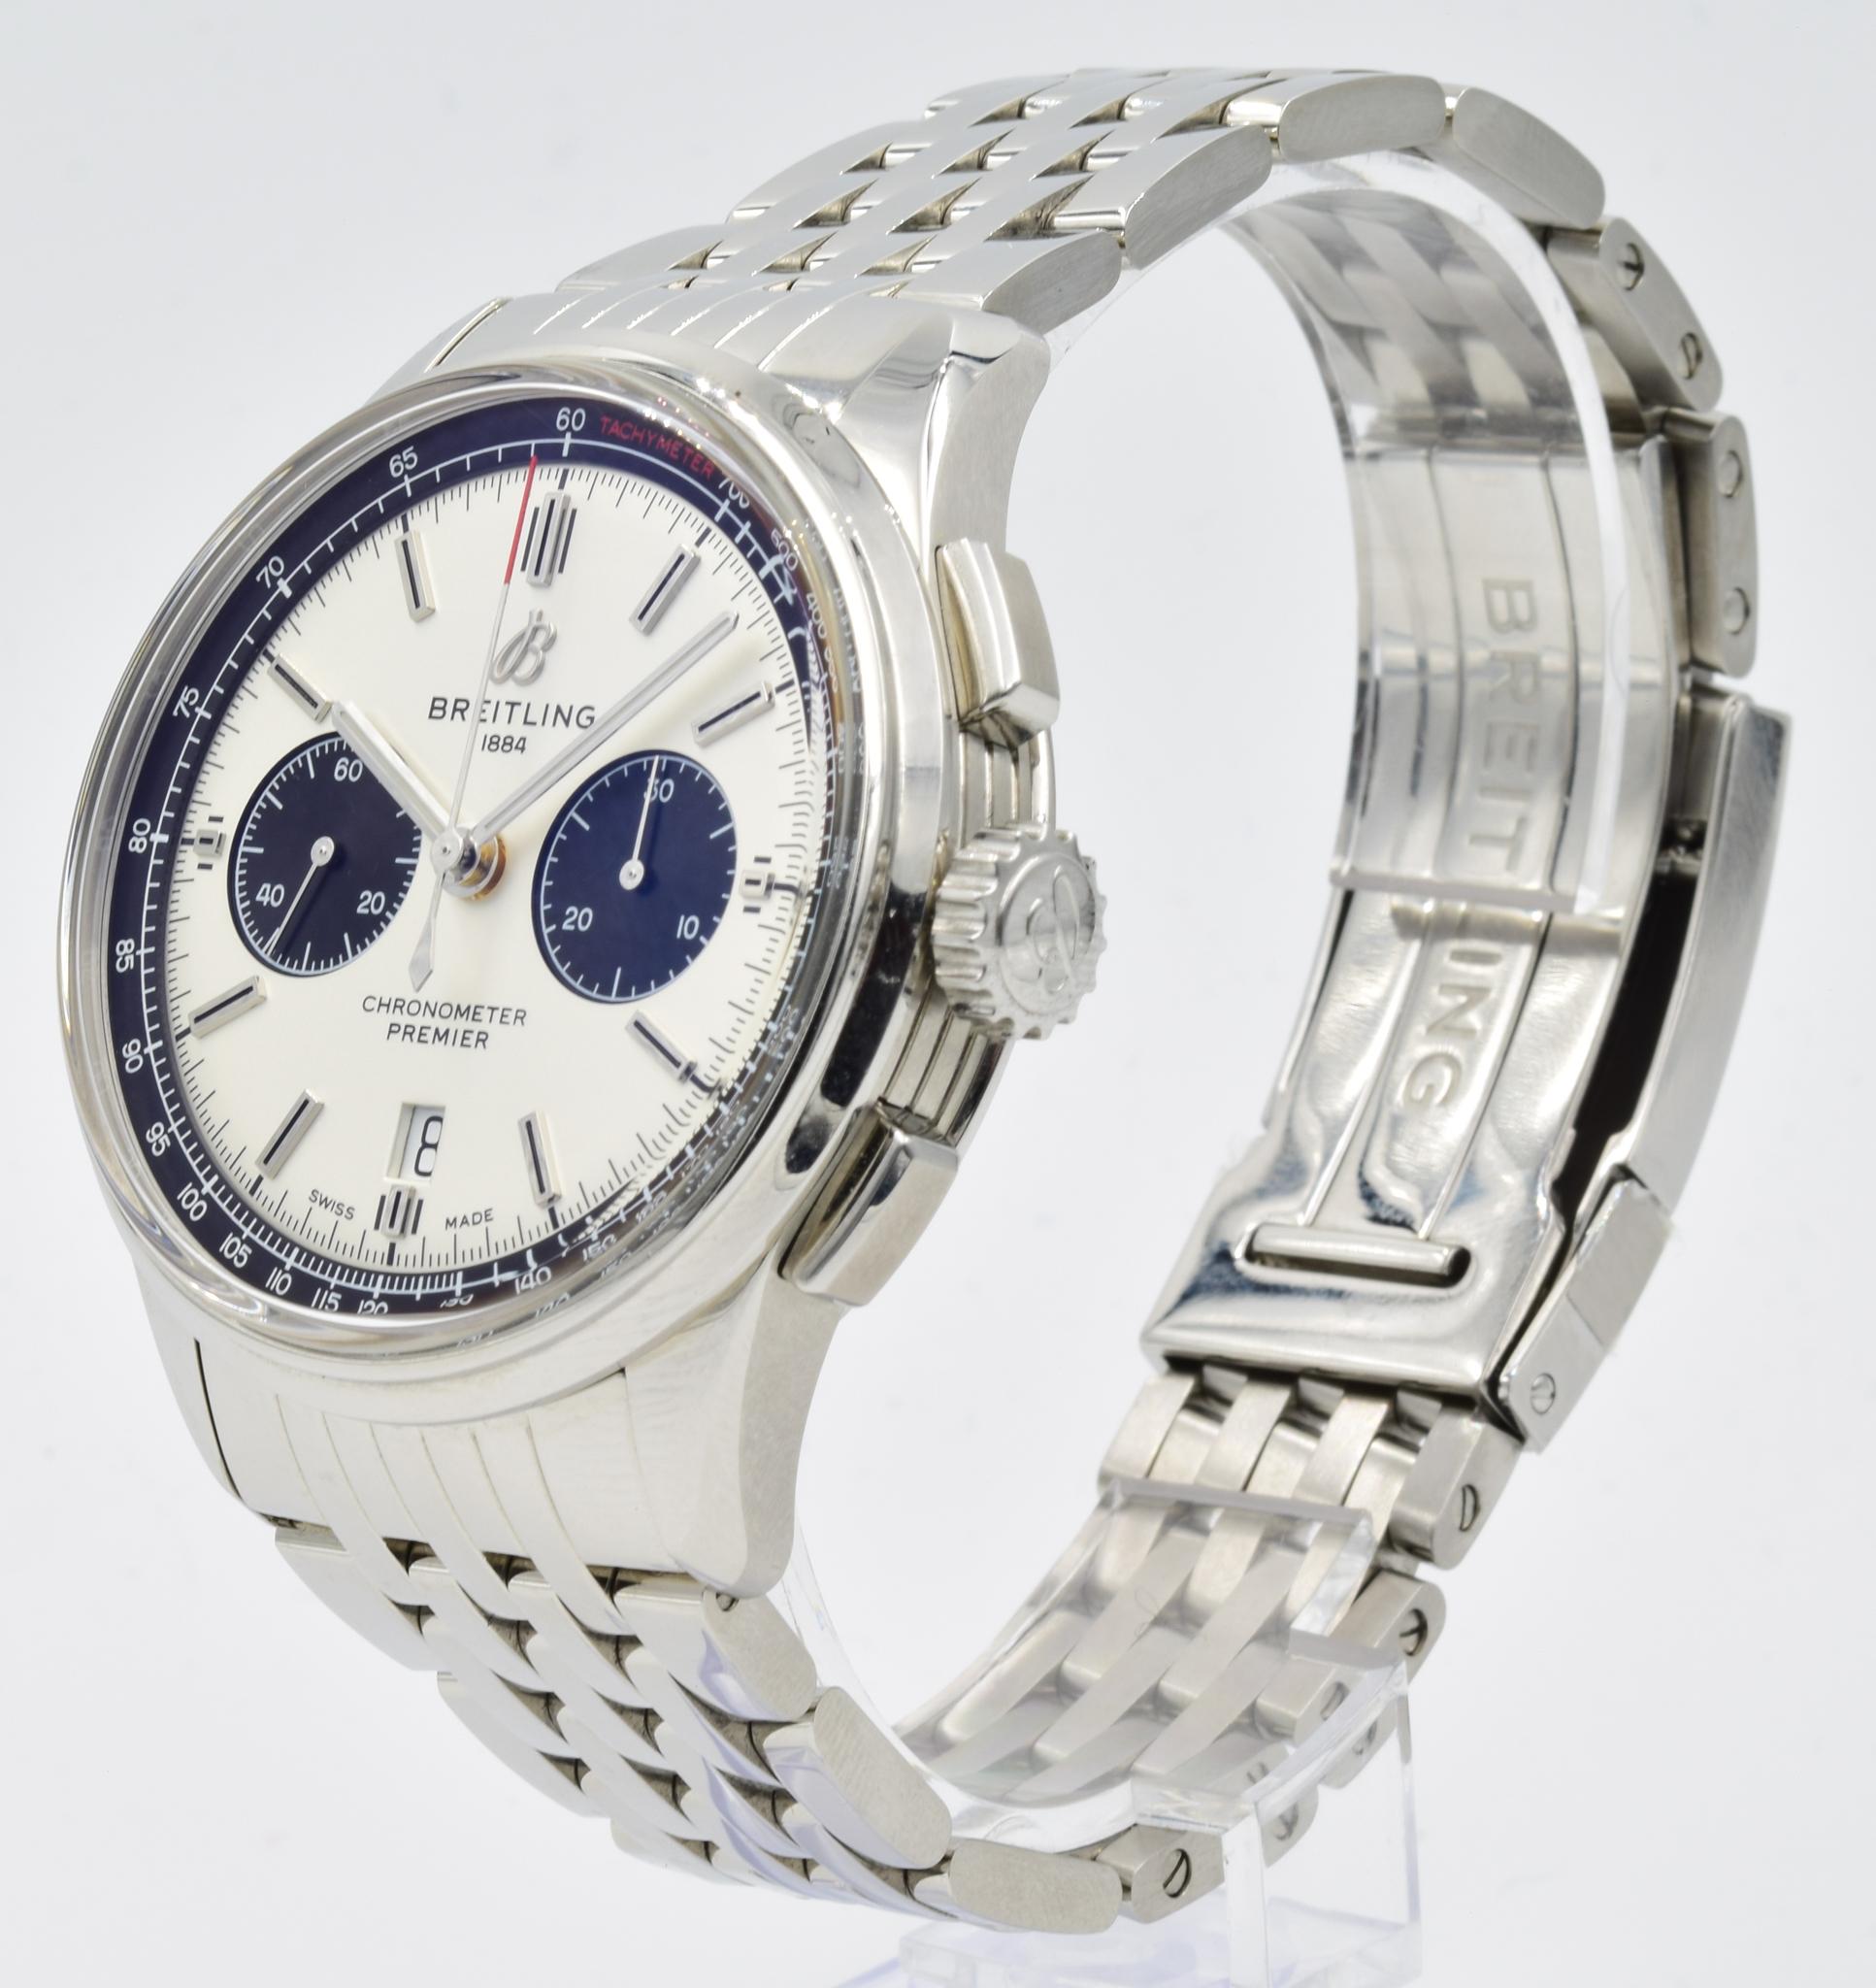 This Breitling Premier B01 Chronograph was recently traded in to our store and is in very good condition! This watch comes with the full box and papers, including an additional black crocodile strap (short). This model features the silver 